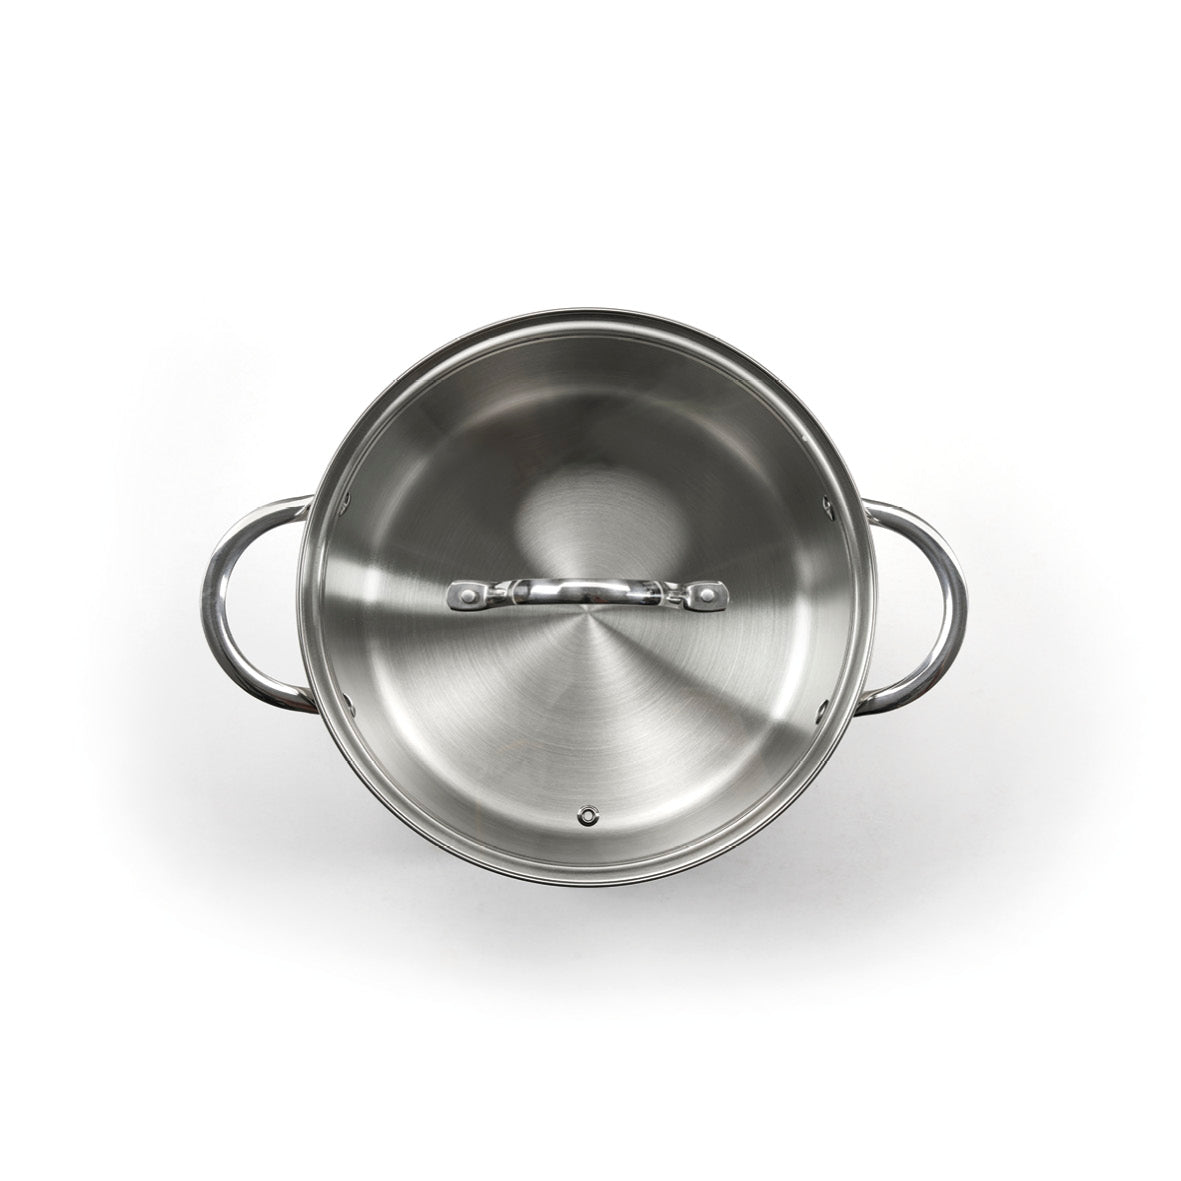 Pasta pot with insert Qulinox Pro - Triple Bottom - Stainless steel - with lid - 24 cm